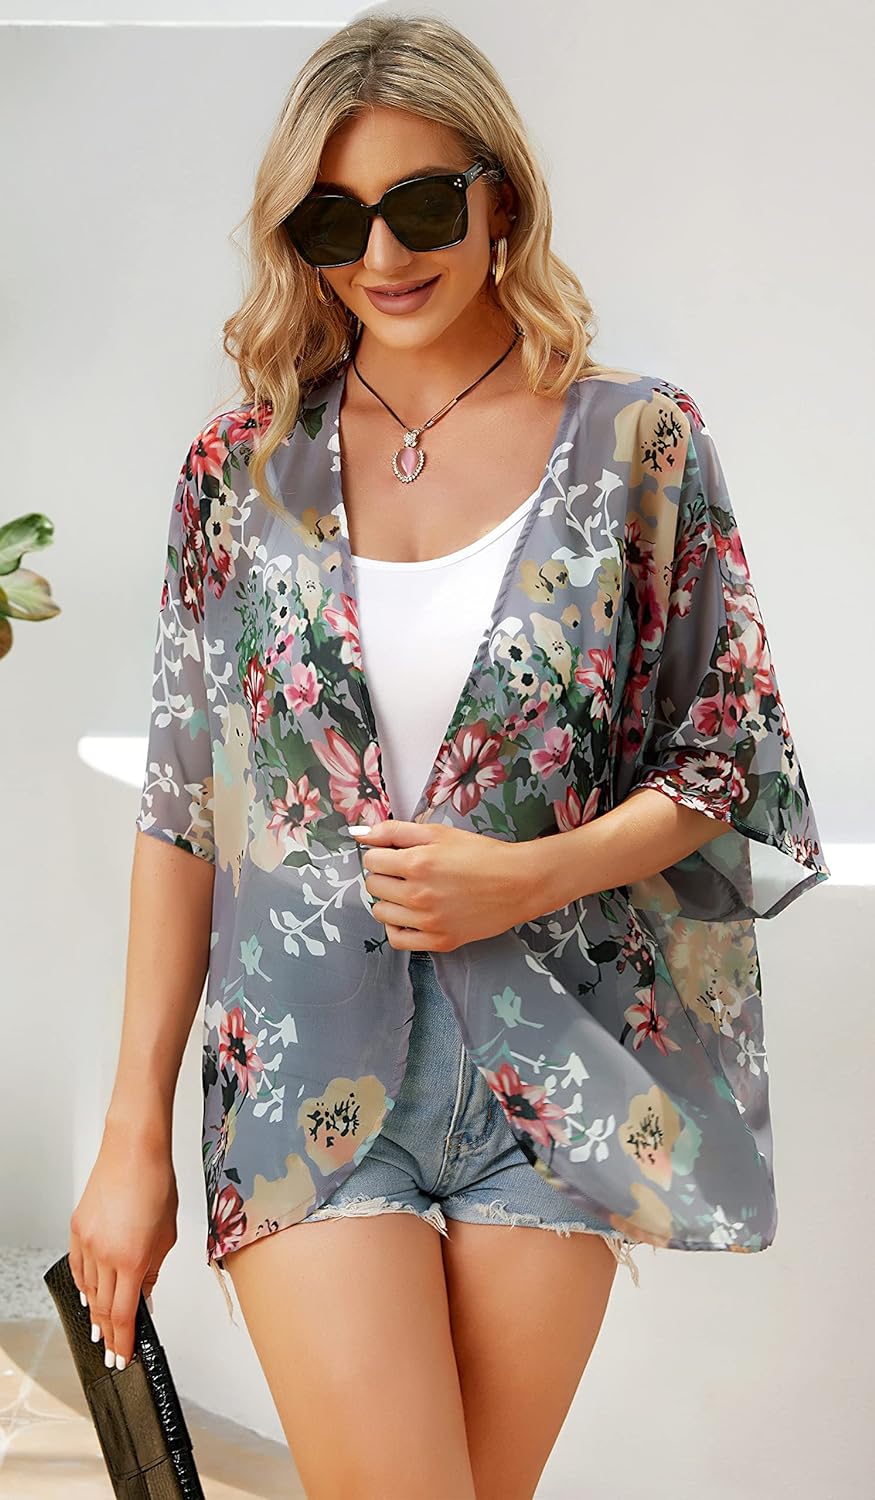 Womens Summer Tops Kimono Cardigan Floral Beach Cover up Casual Jackets Shirts